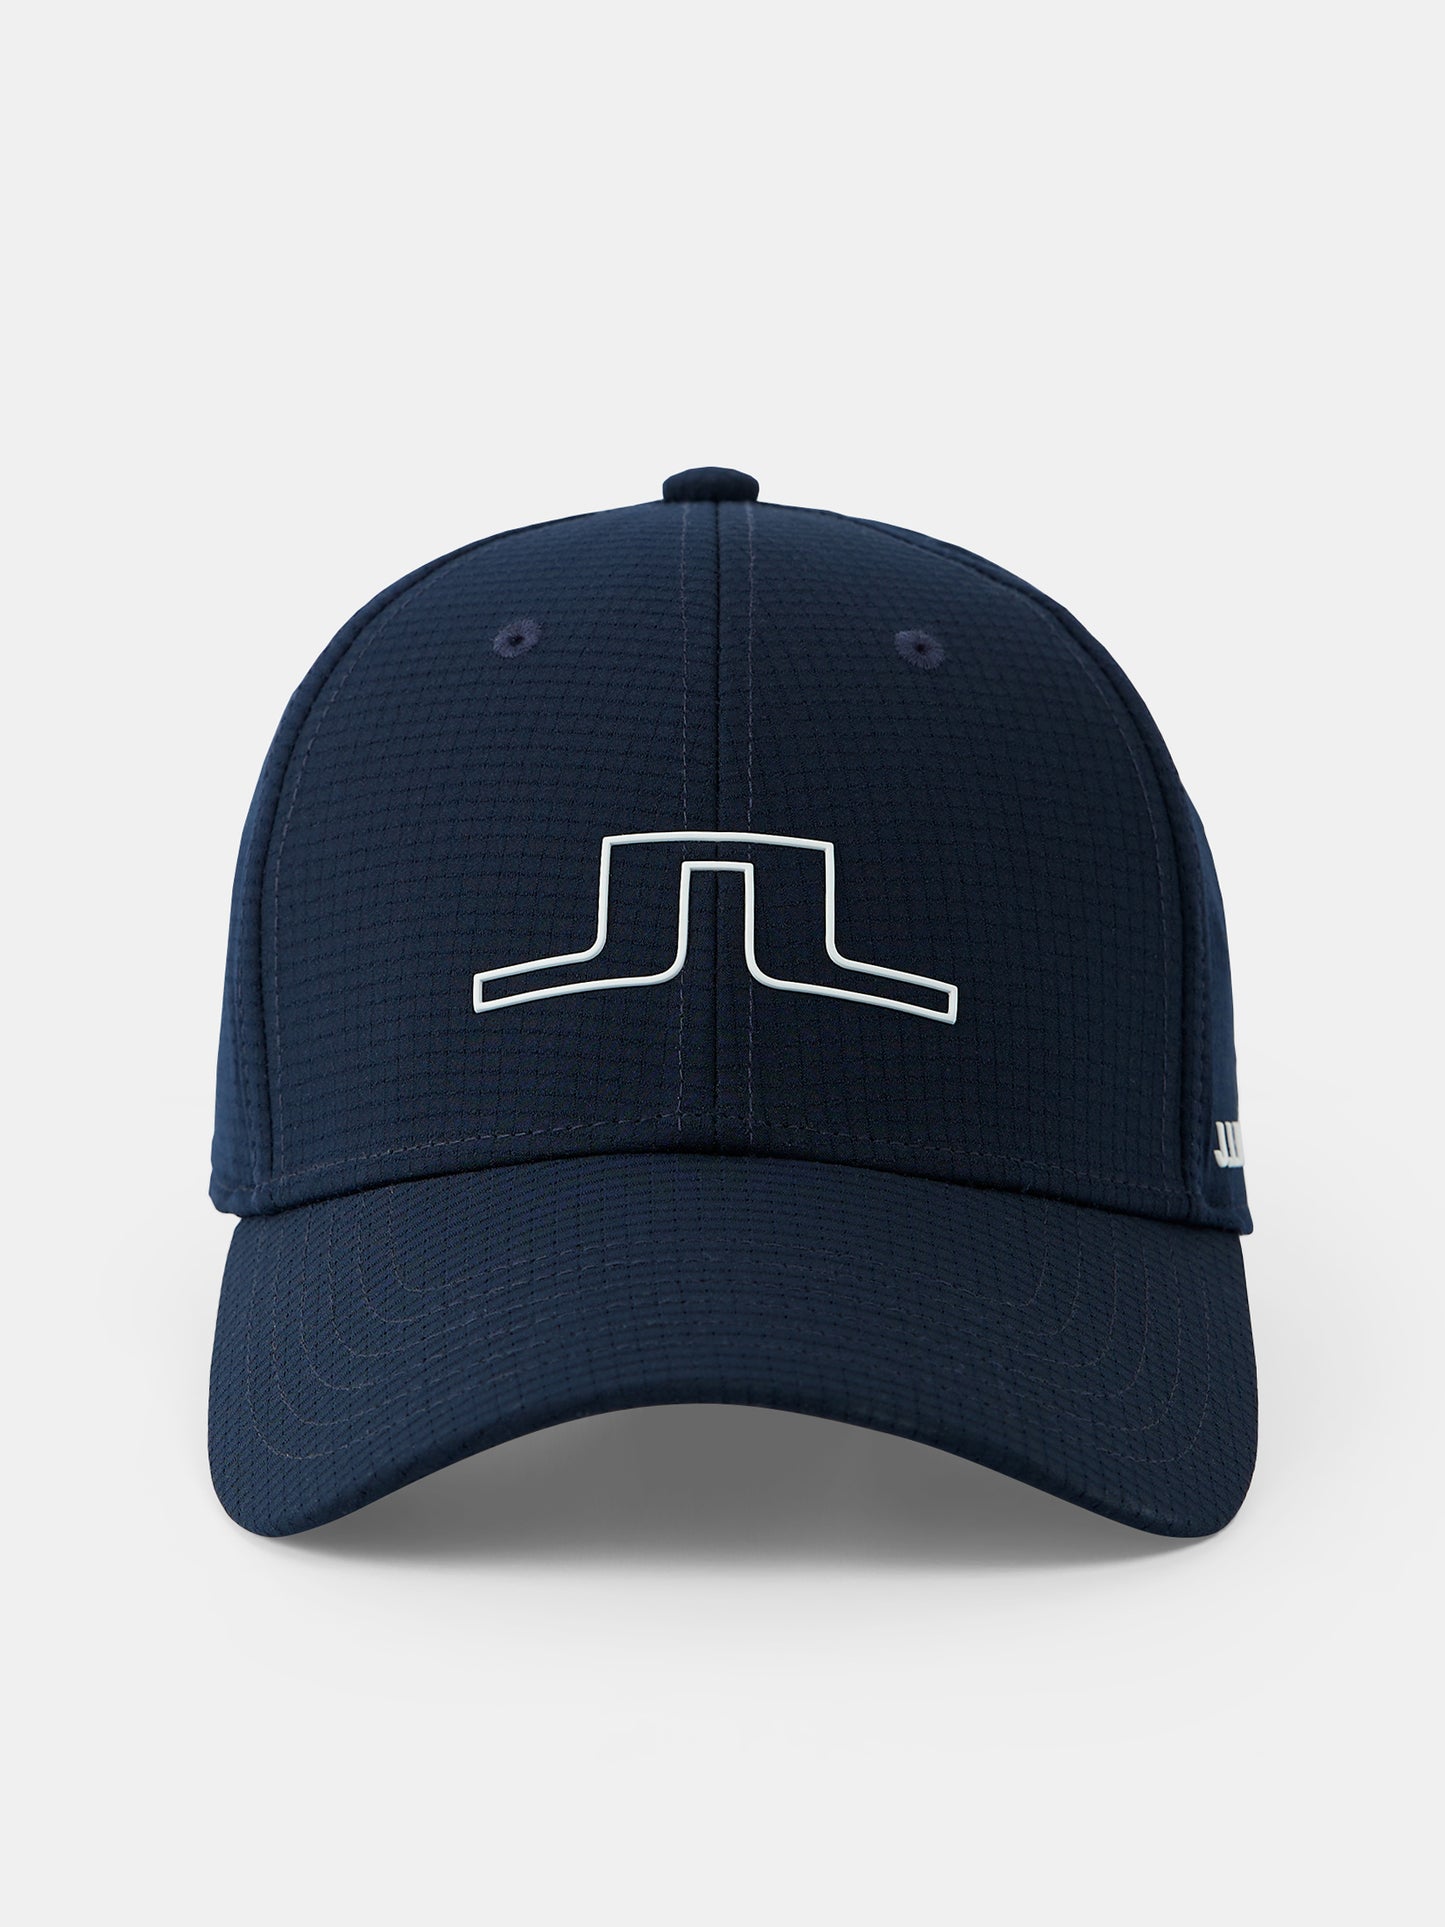 J.LINDEBERG Caden Golf Cap (Couleur : navy, Taille : one size